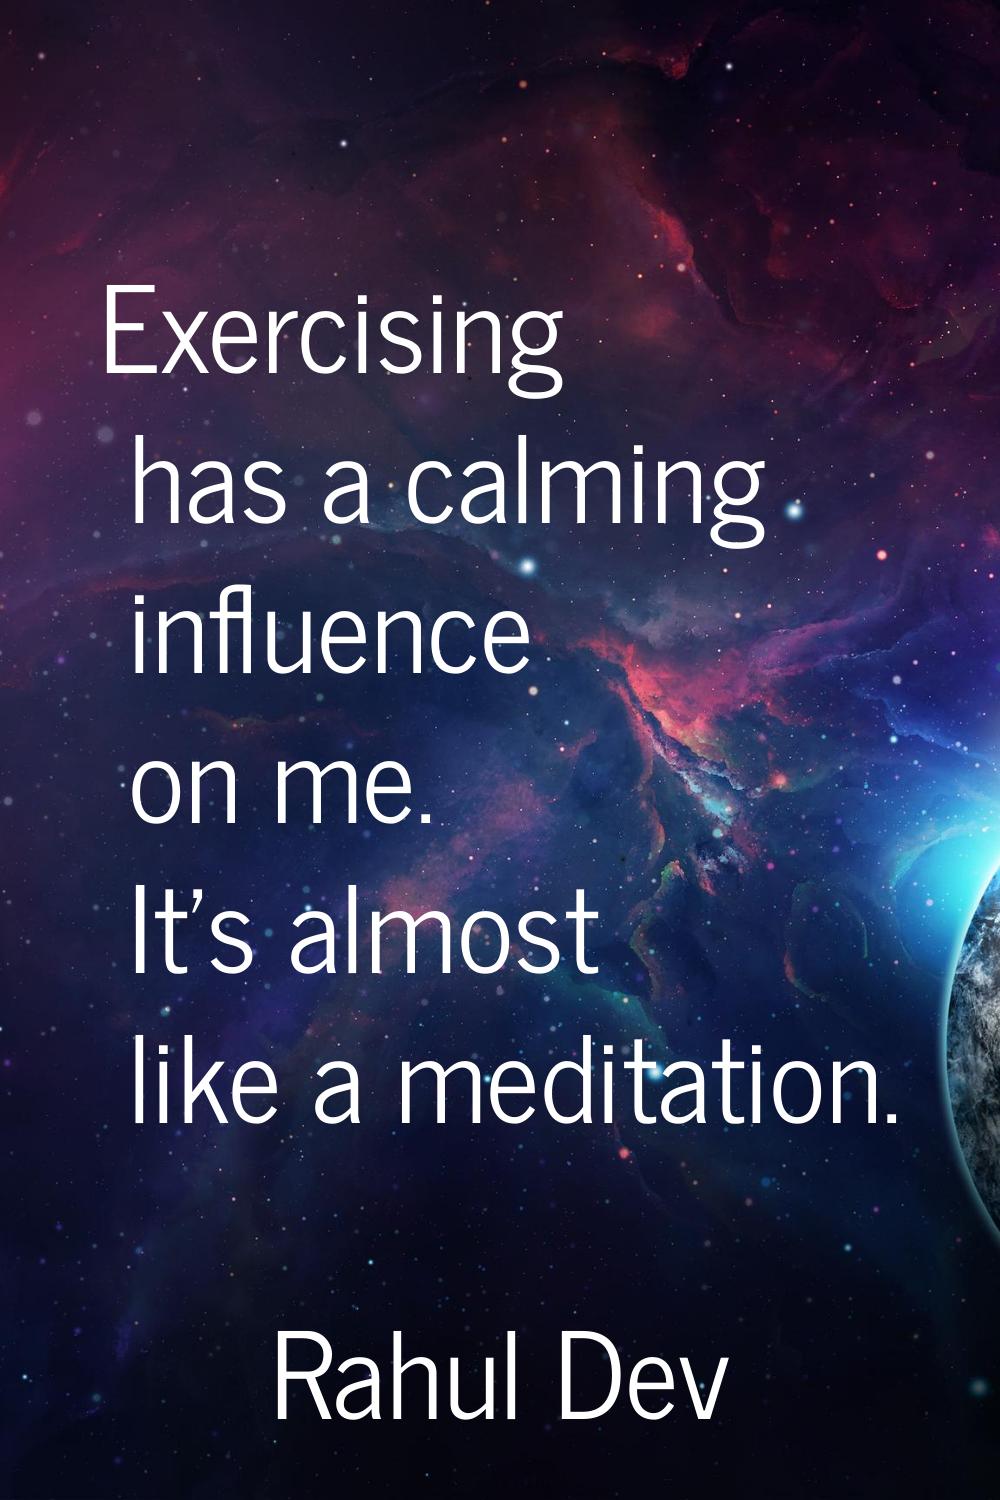 Exercising has a calming influence on me. It's almost like a meditation.